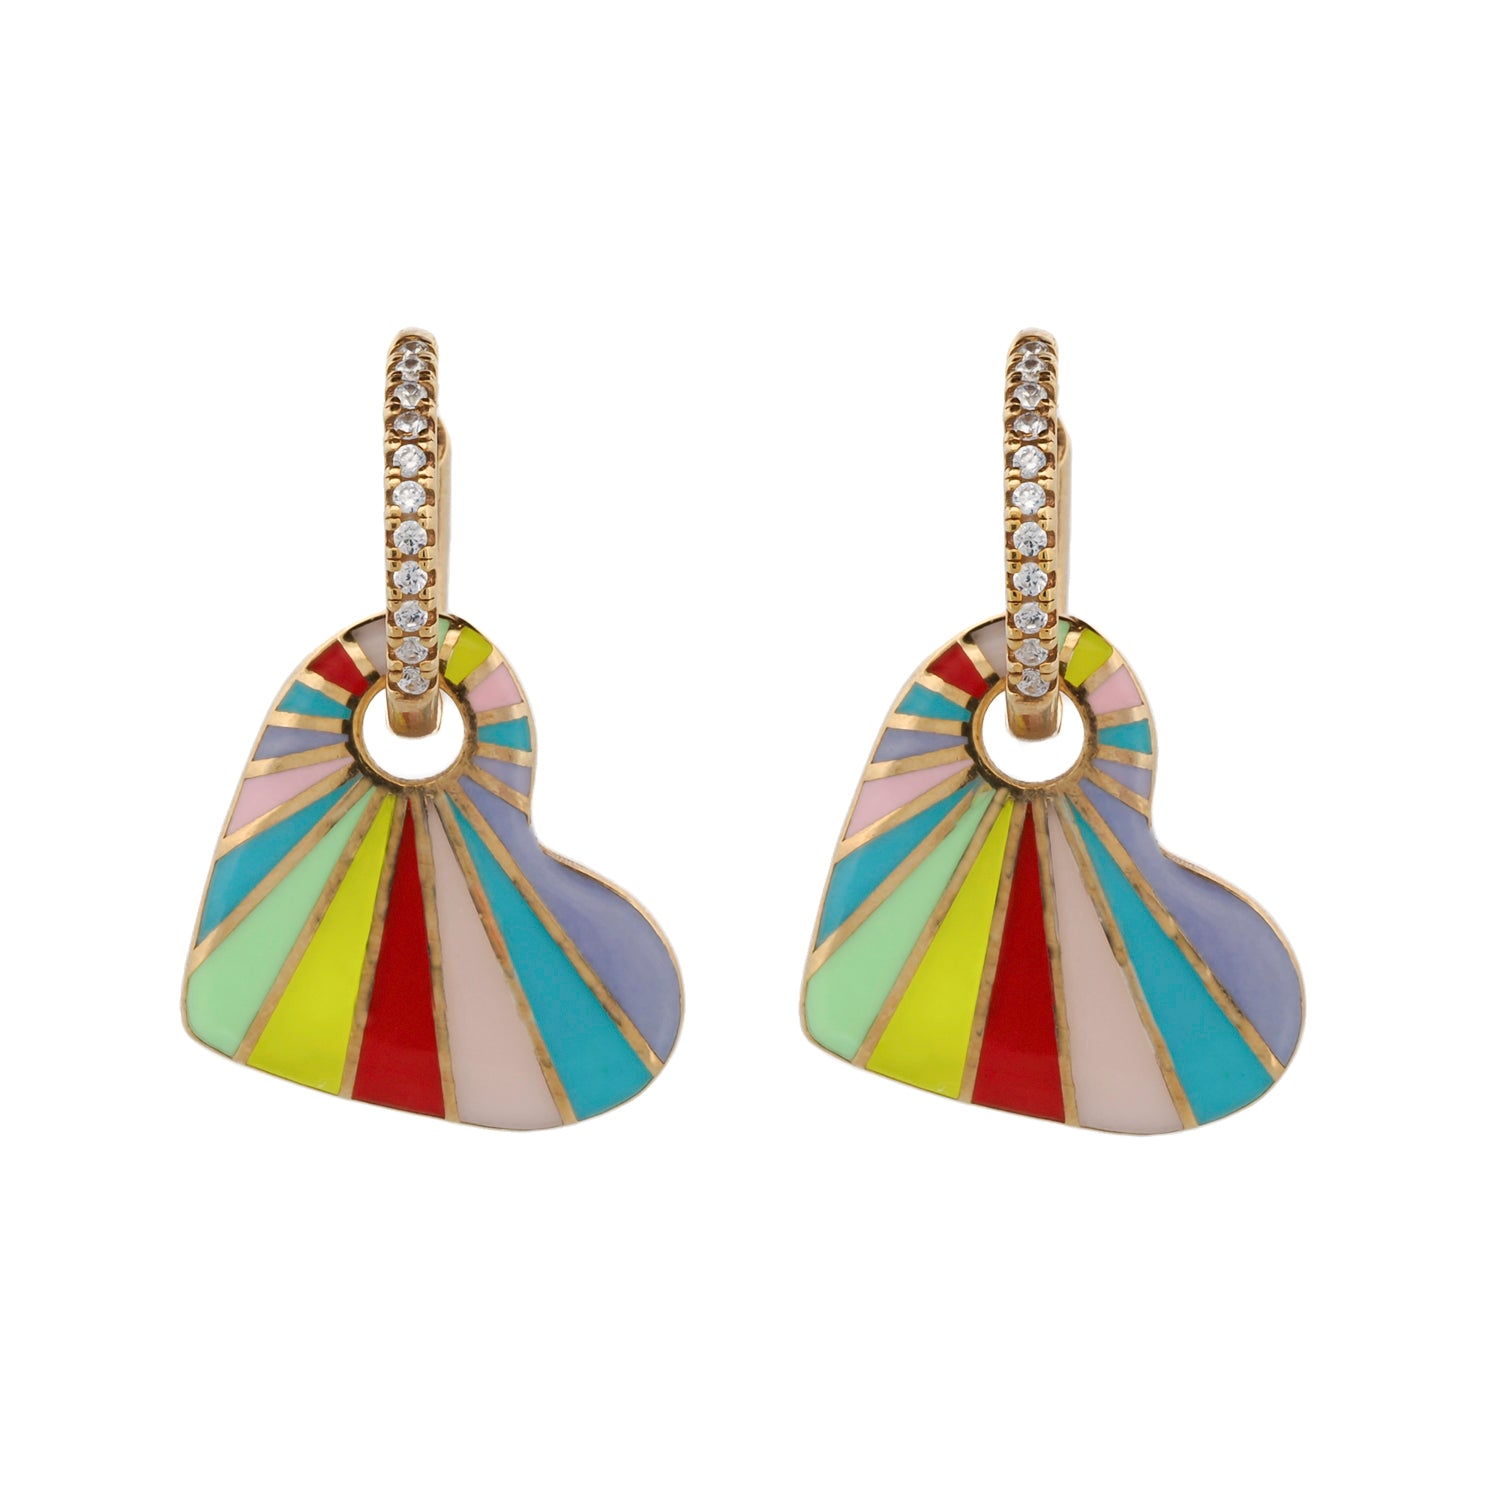 Colorful Enamel Heart Hoop Earrings with Gold and Diamonds